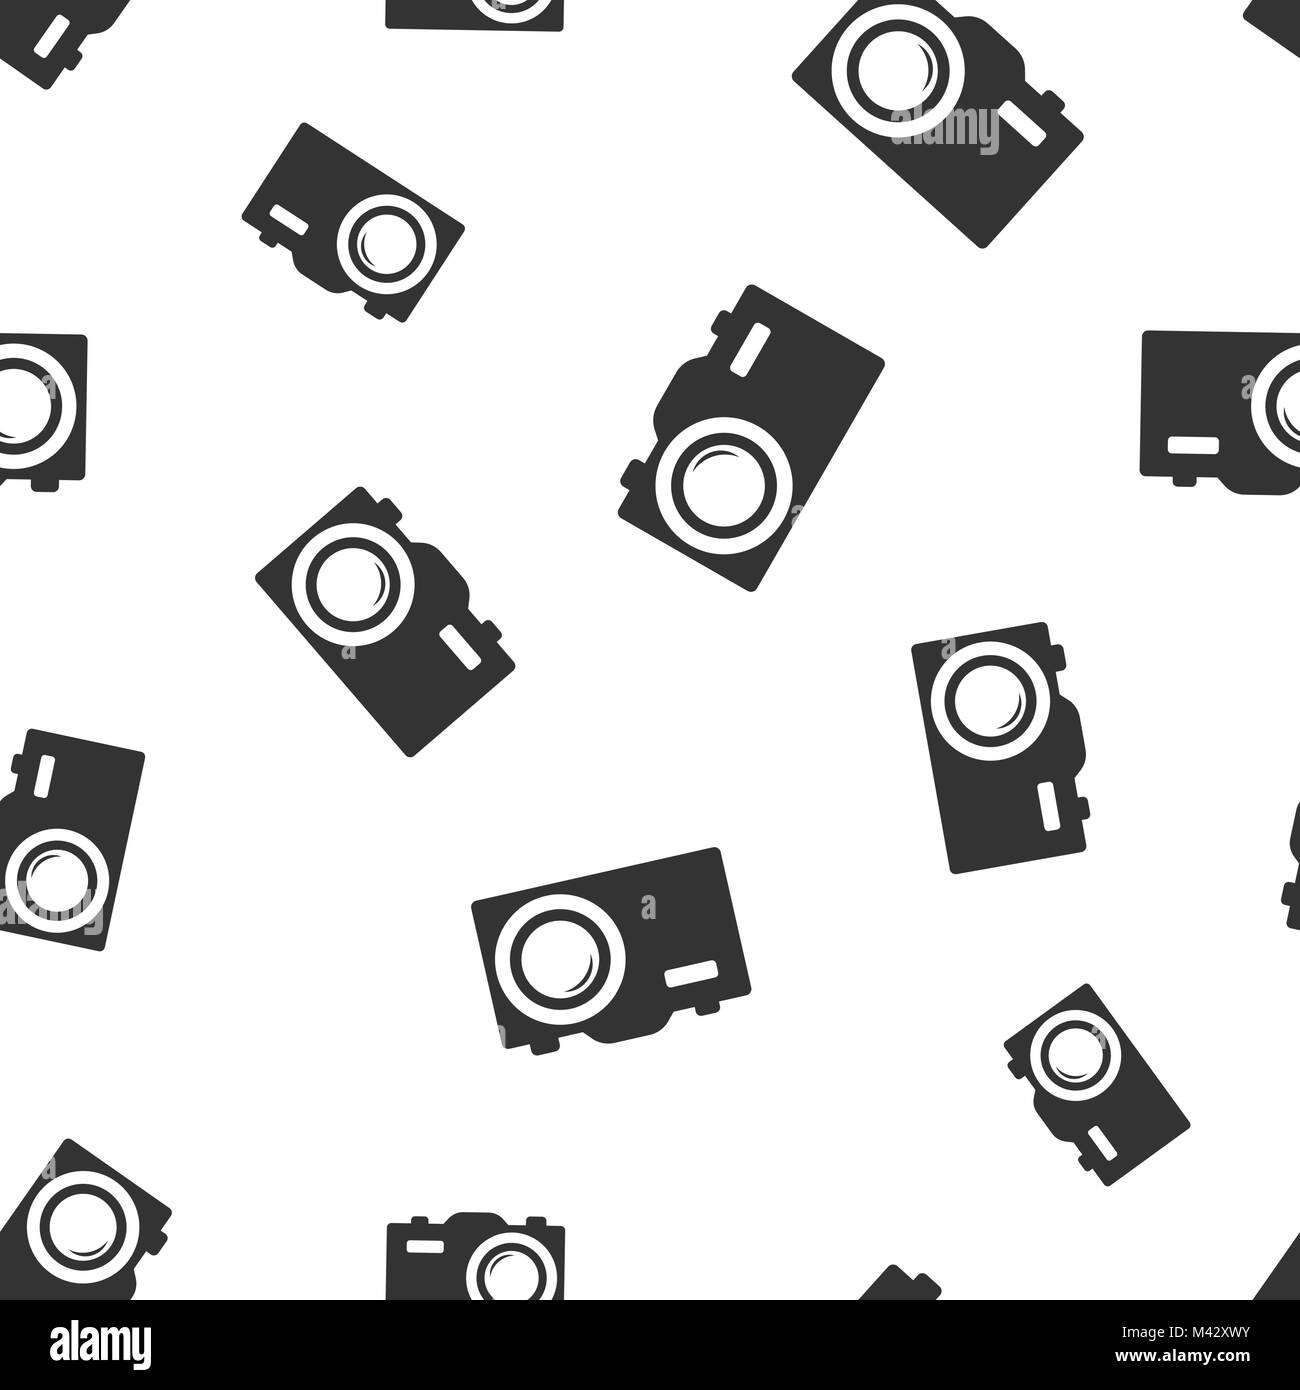 Camera icon seamless pattern background business Vector Image